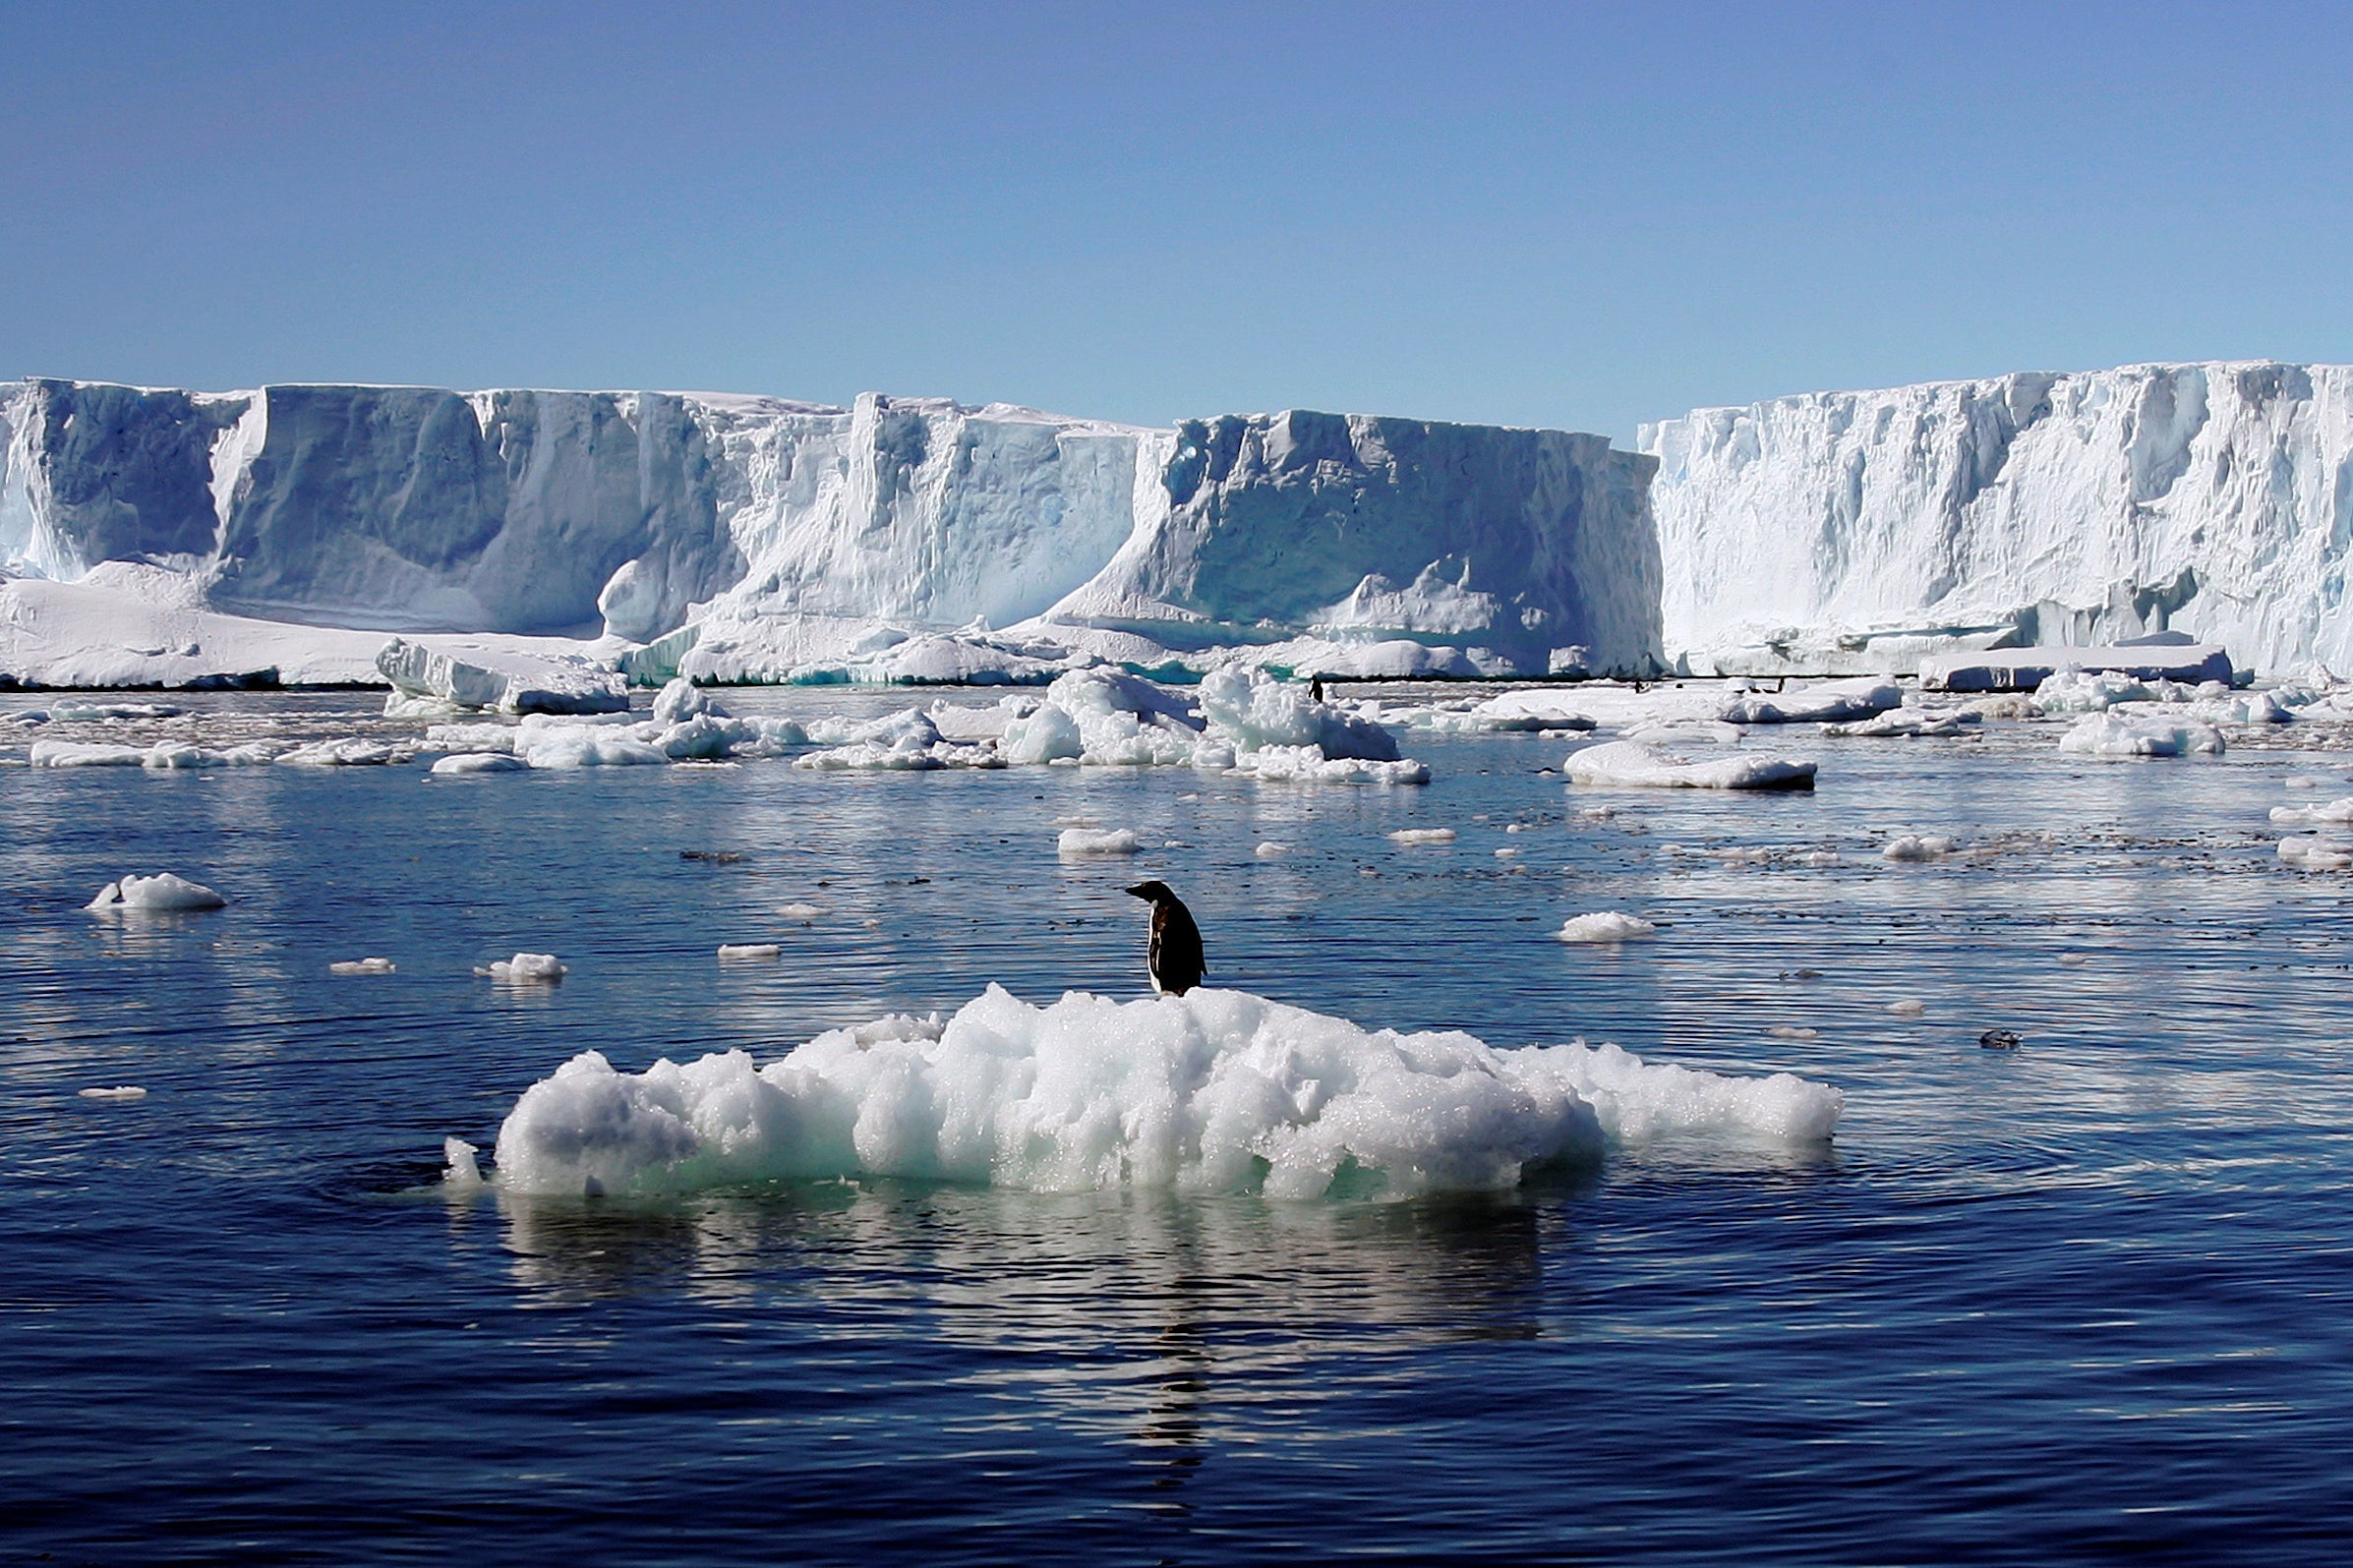 A penguin stands on a block of melting ice, surrounded by water and far-off glaciers.